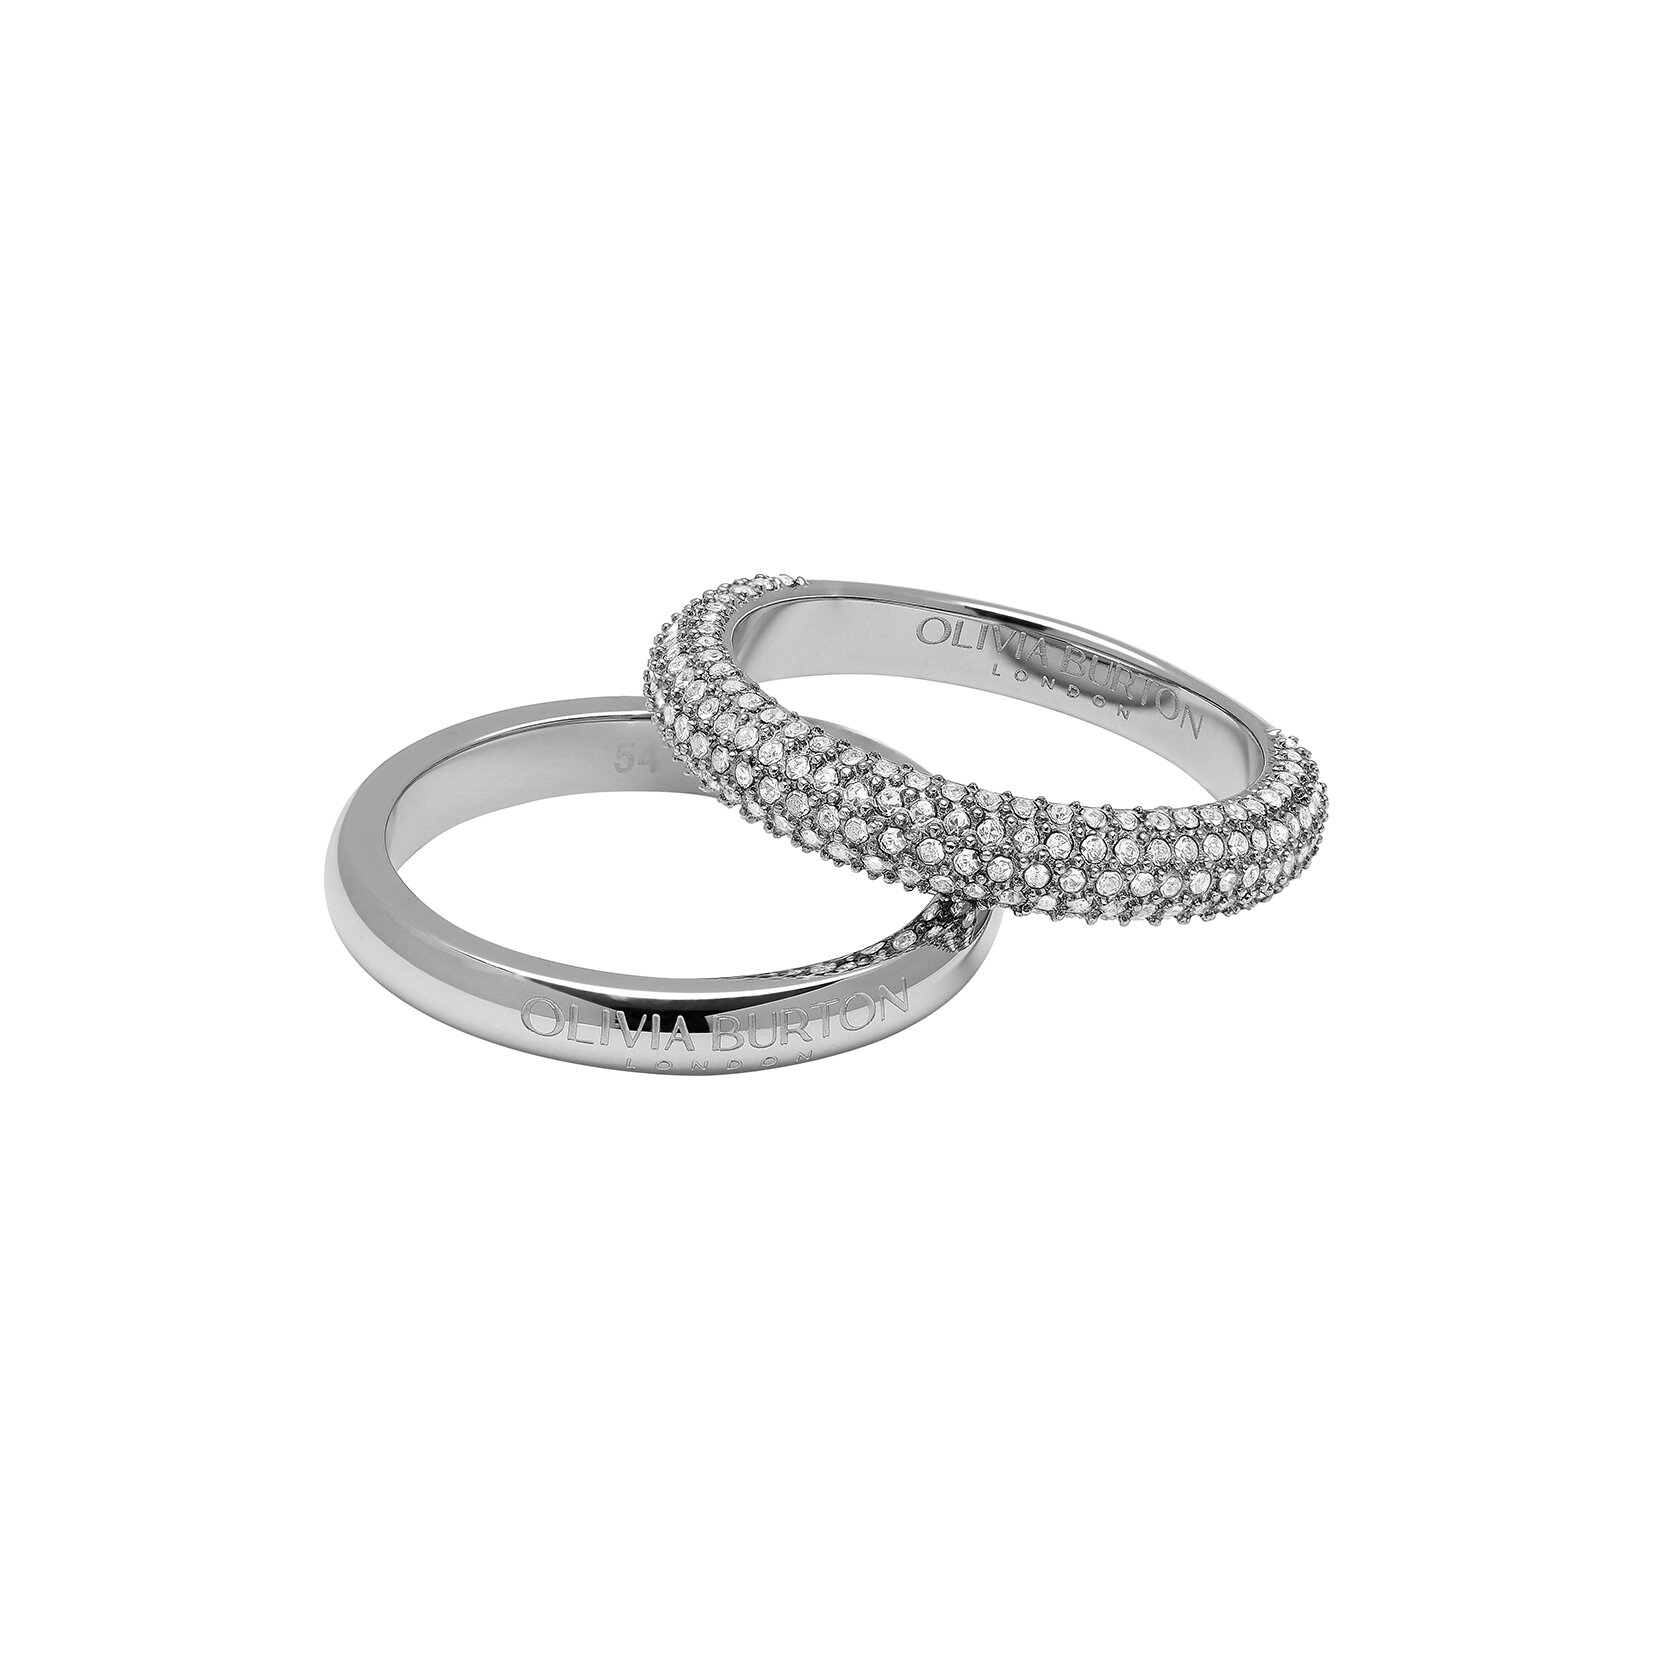 Entwine Silver Ring Set M